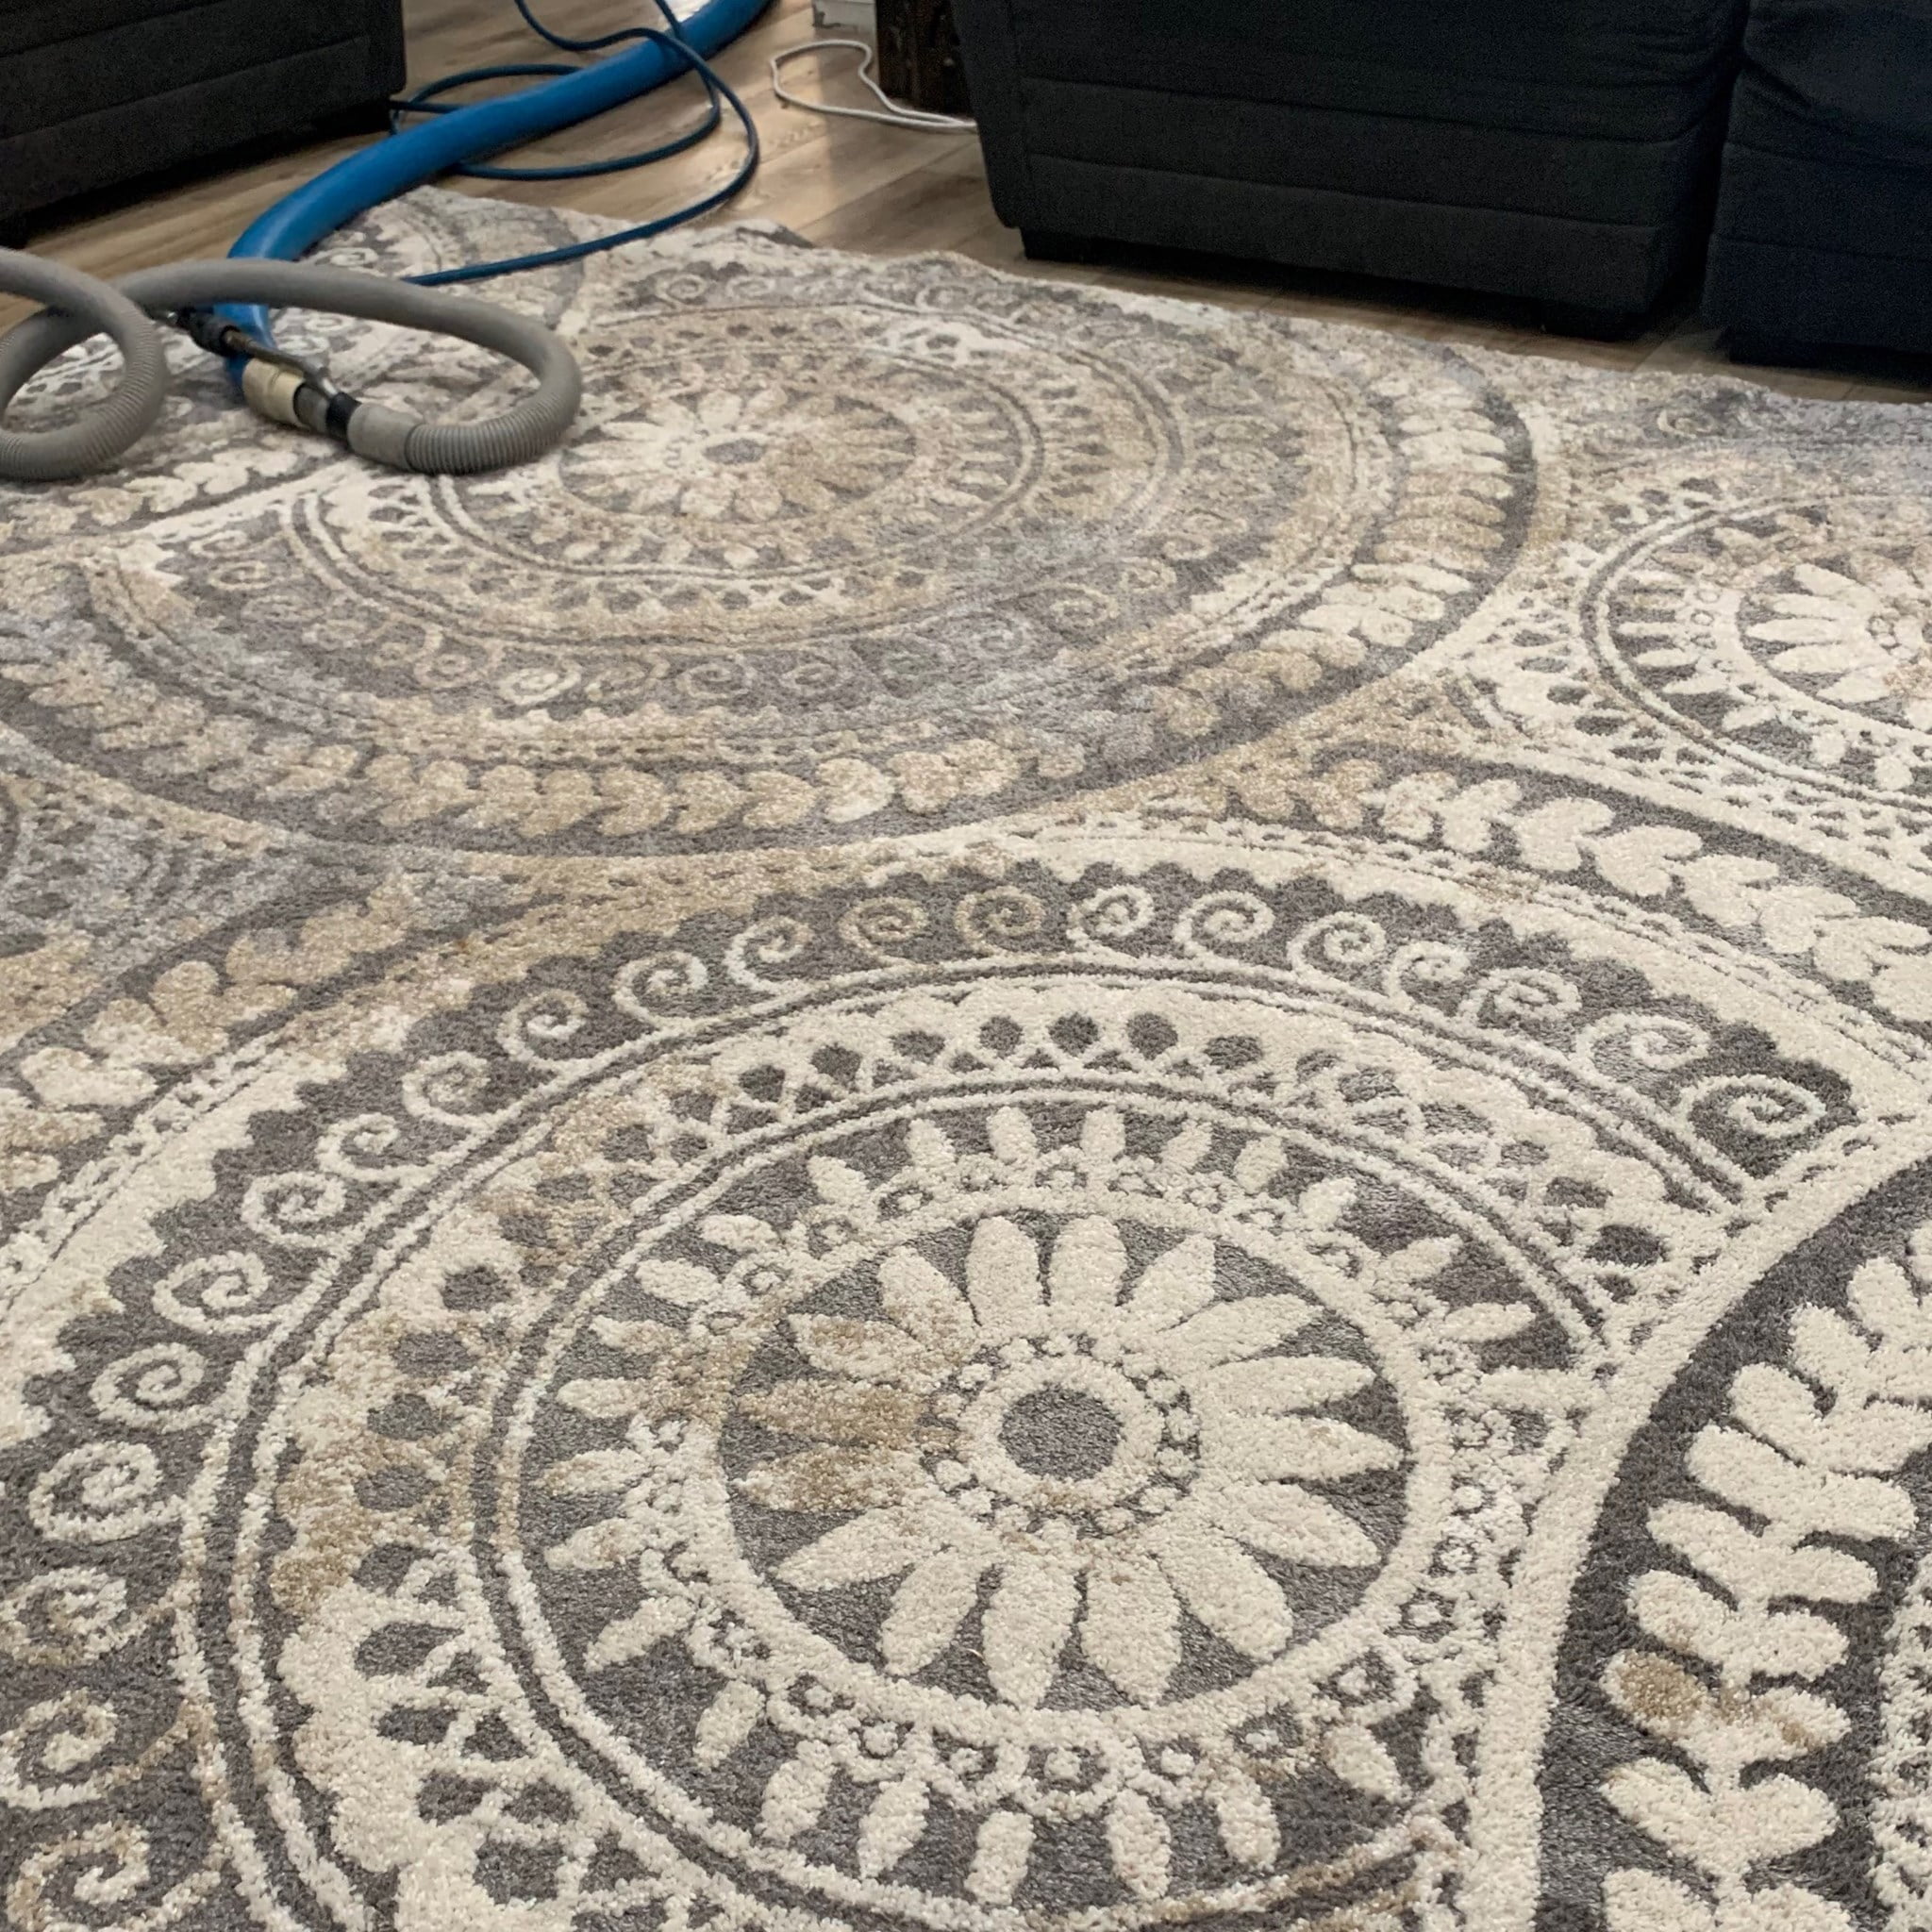 Area Rug Cleaning Drop Off